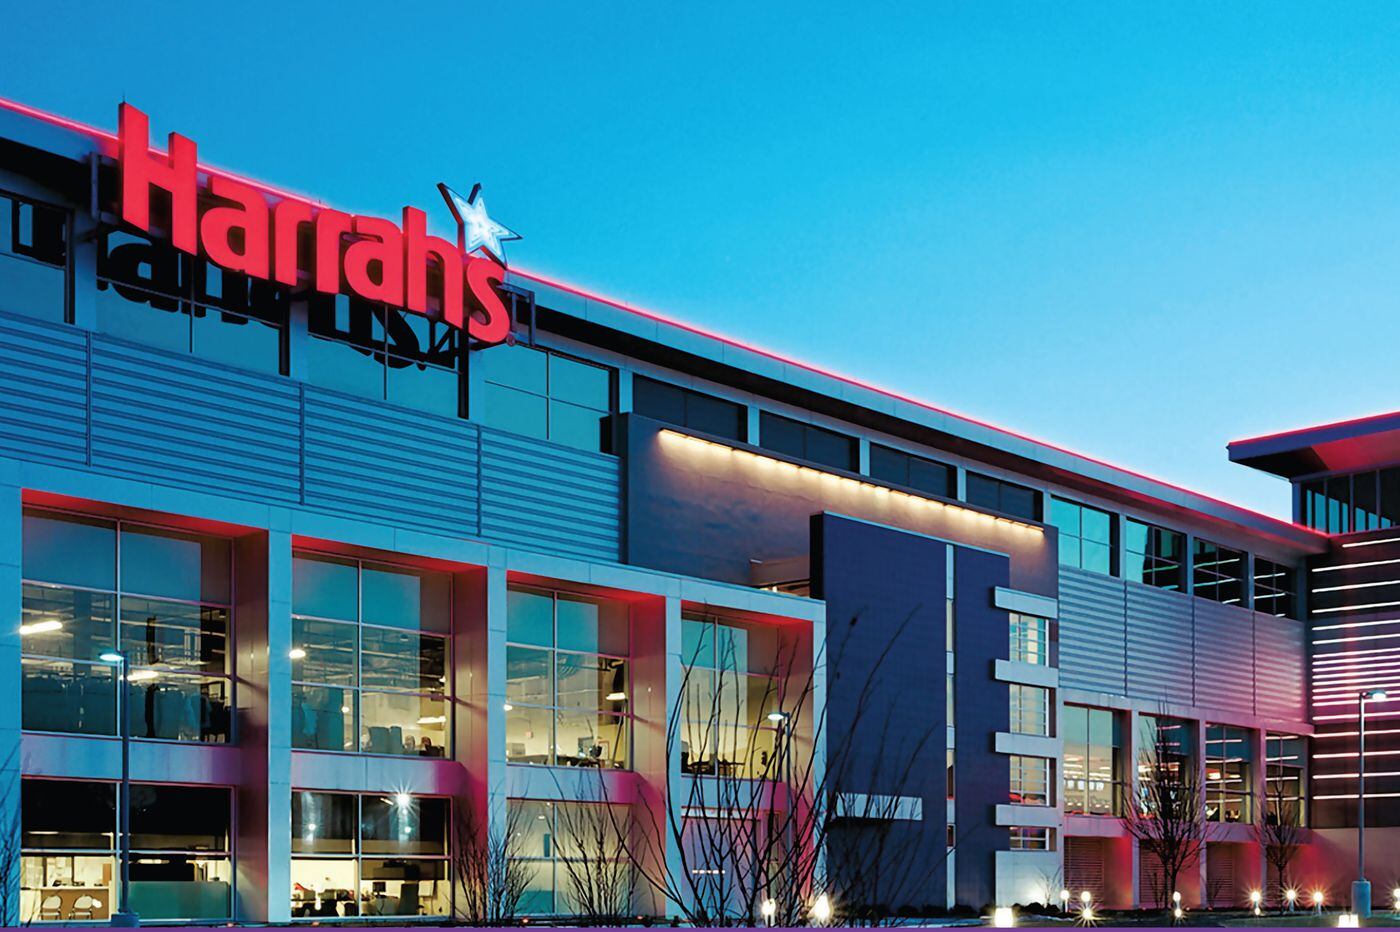 Sep 26, · On Tuesday, Harrah's Philadelphia Casino & Racetrack became the third Pennsylvania gaming operator to apply for a sports wagering license.The Pennsylvania Gaming Control Board announced that the facility submitted an application to offer land-based, online, and mobile sports betting it its patrons.